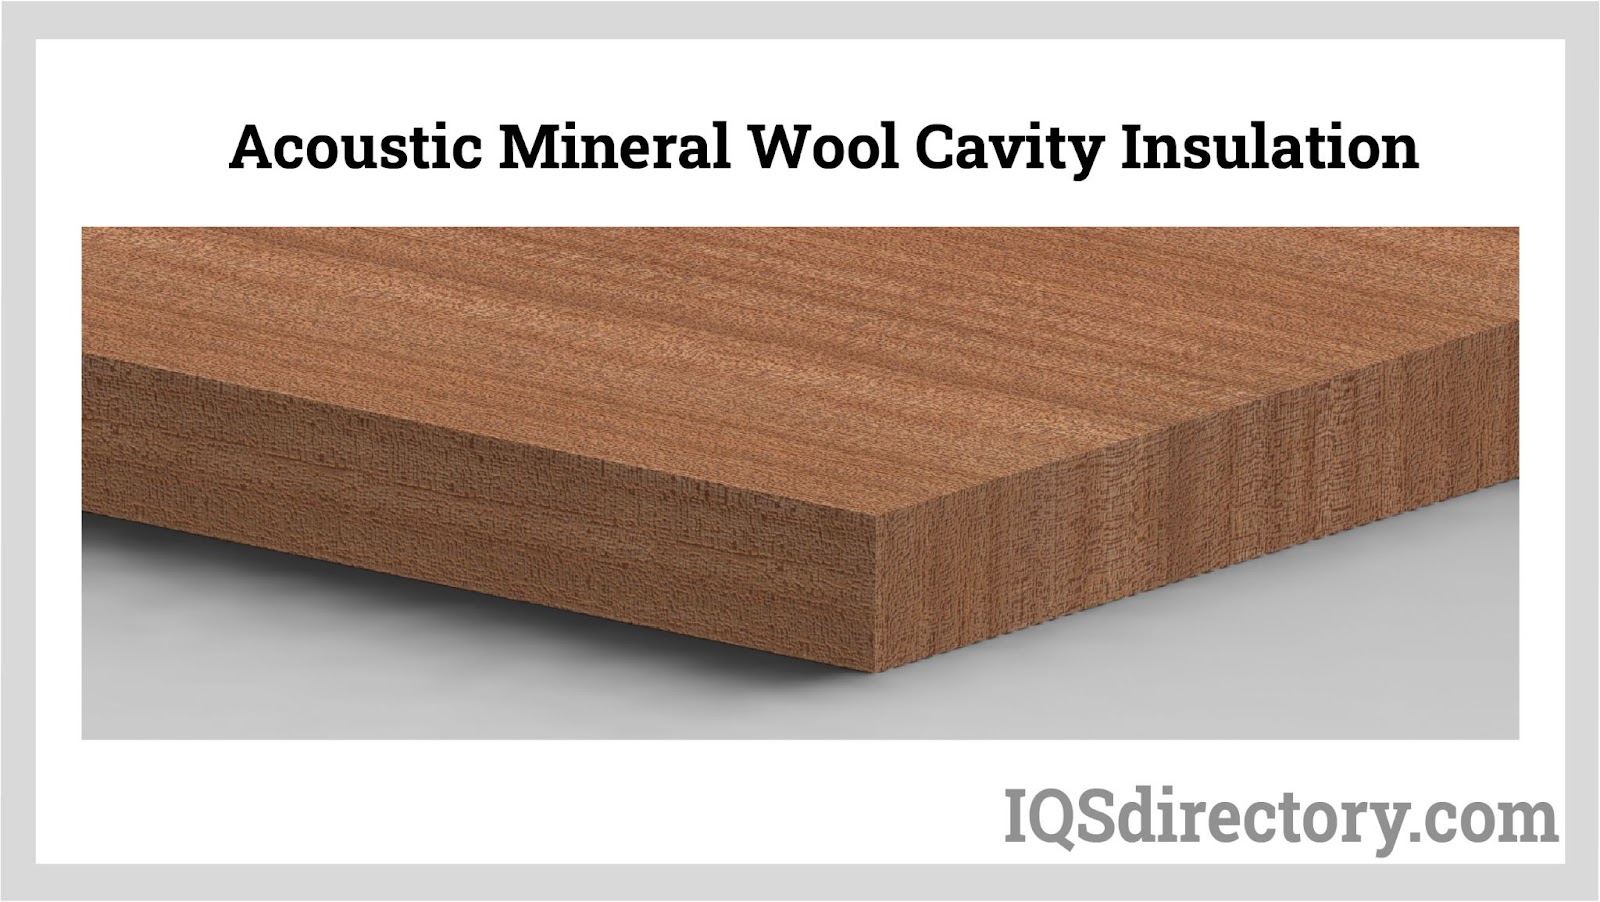 Acoustic Mineral Wool Cavity Insulation